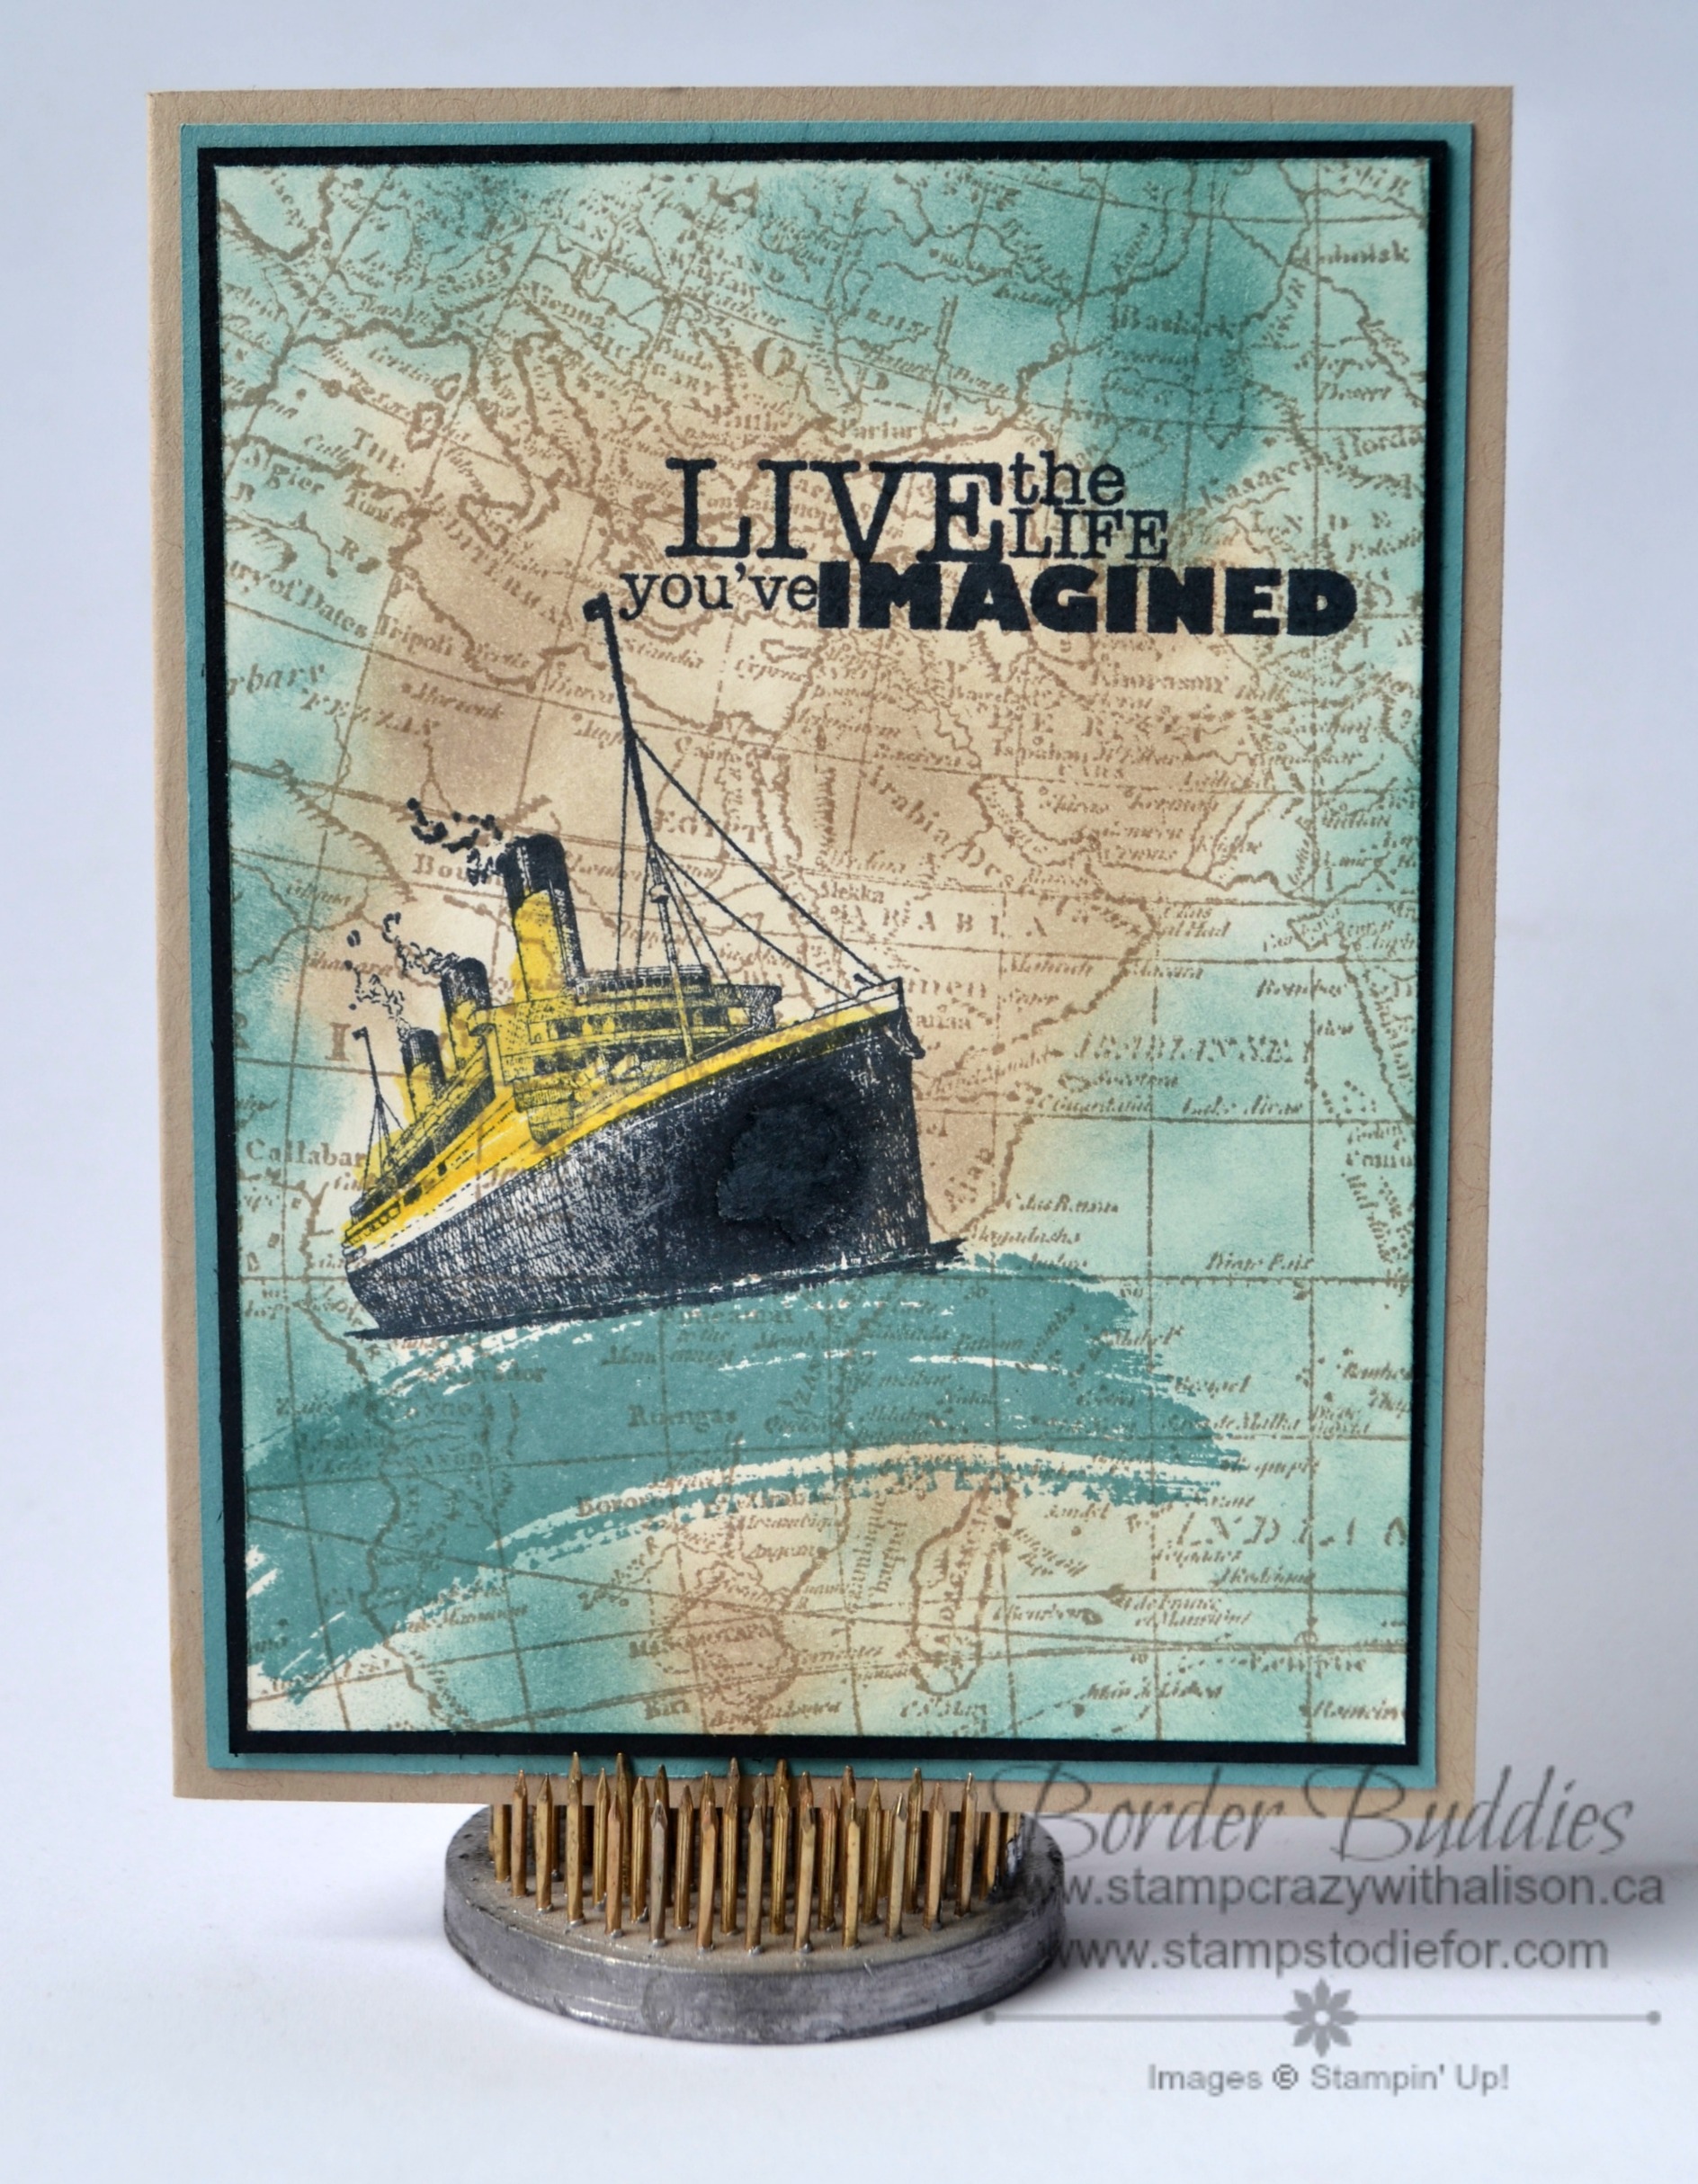 Step Up Stampin’ with Traveler!